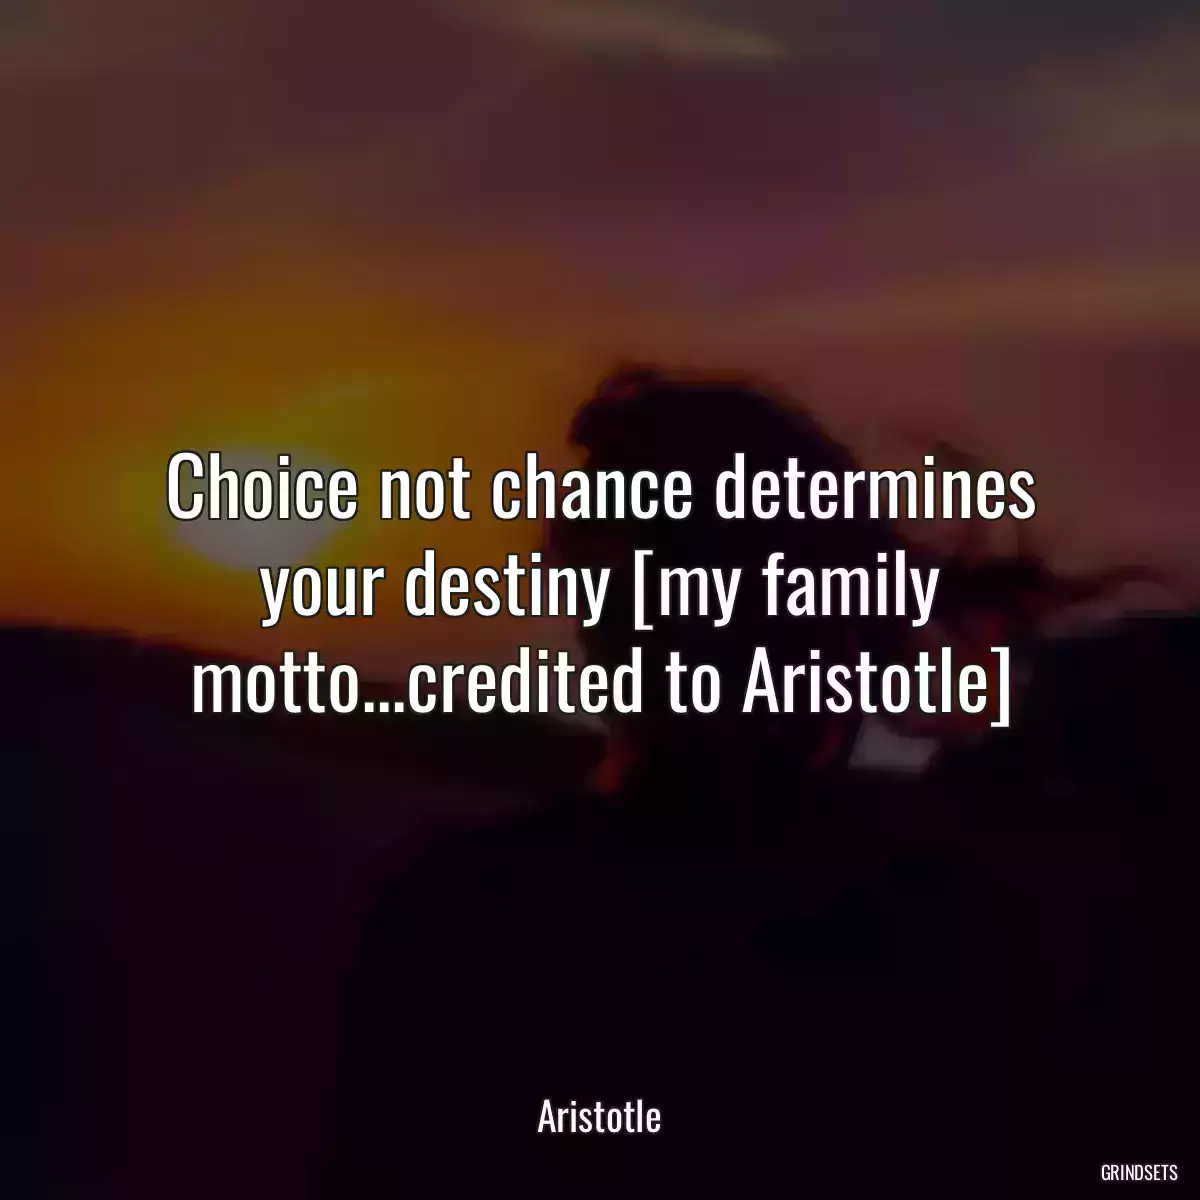 Choice not chance determines your destiny [my family motto...credited to Aristotle]